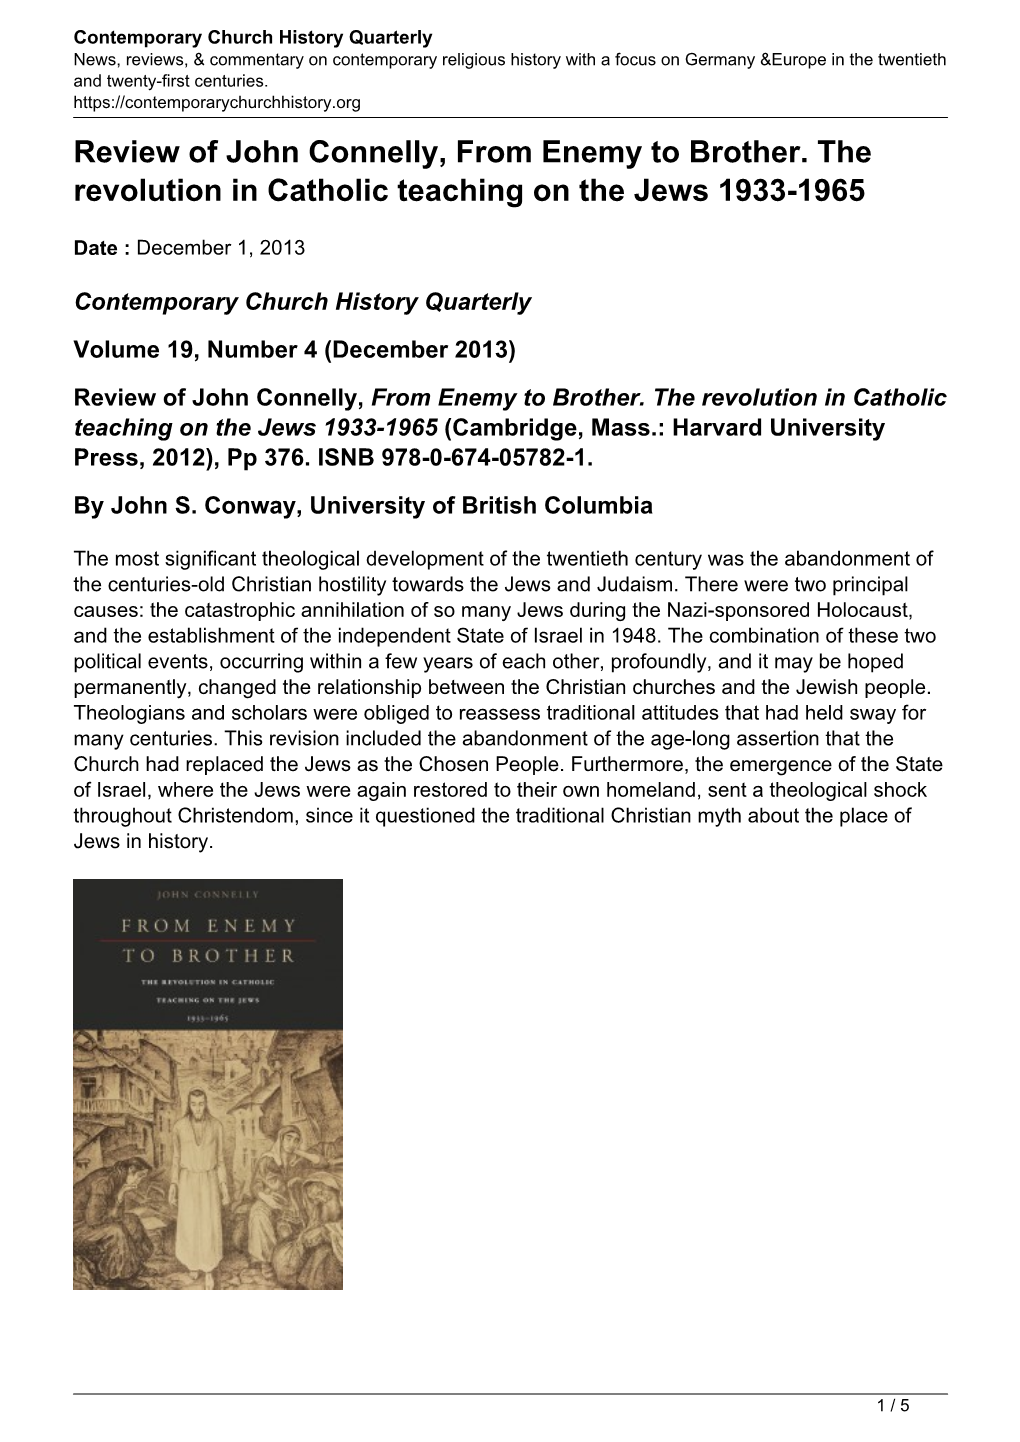 Review of John Connelly, from Enemy to Brother. the Revolution in Catholic Teaching on the Jews 1933-1965